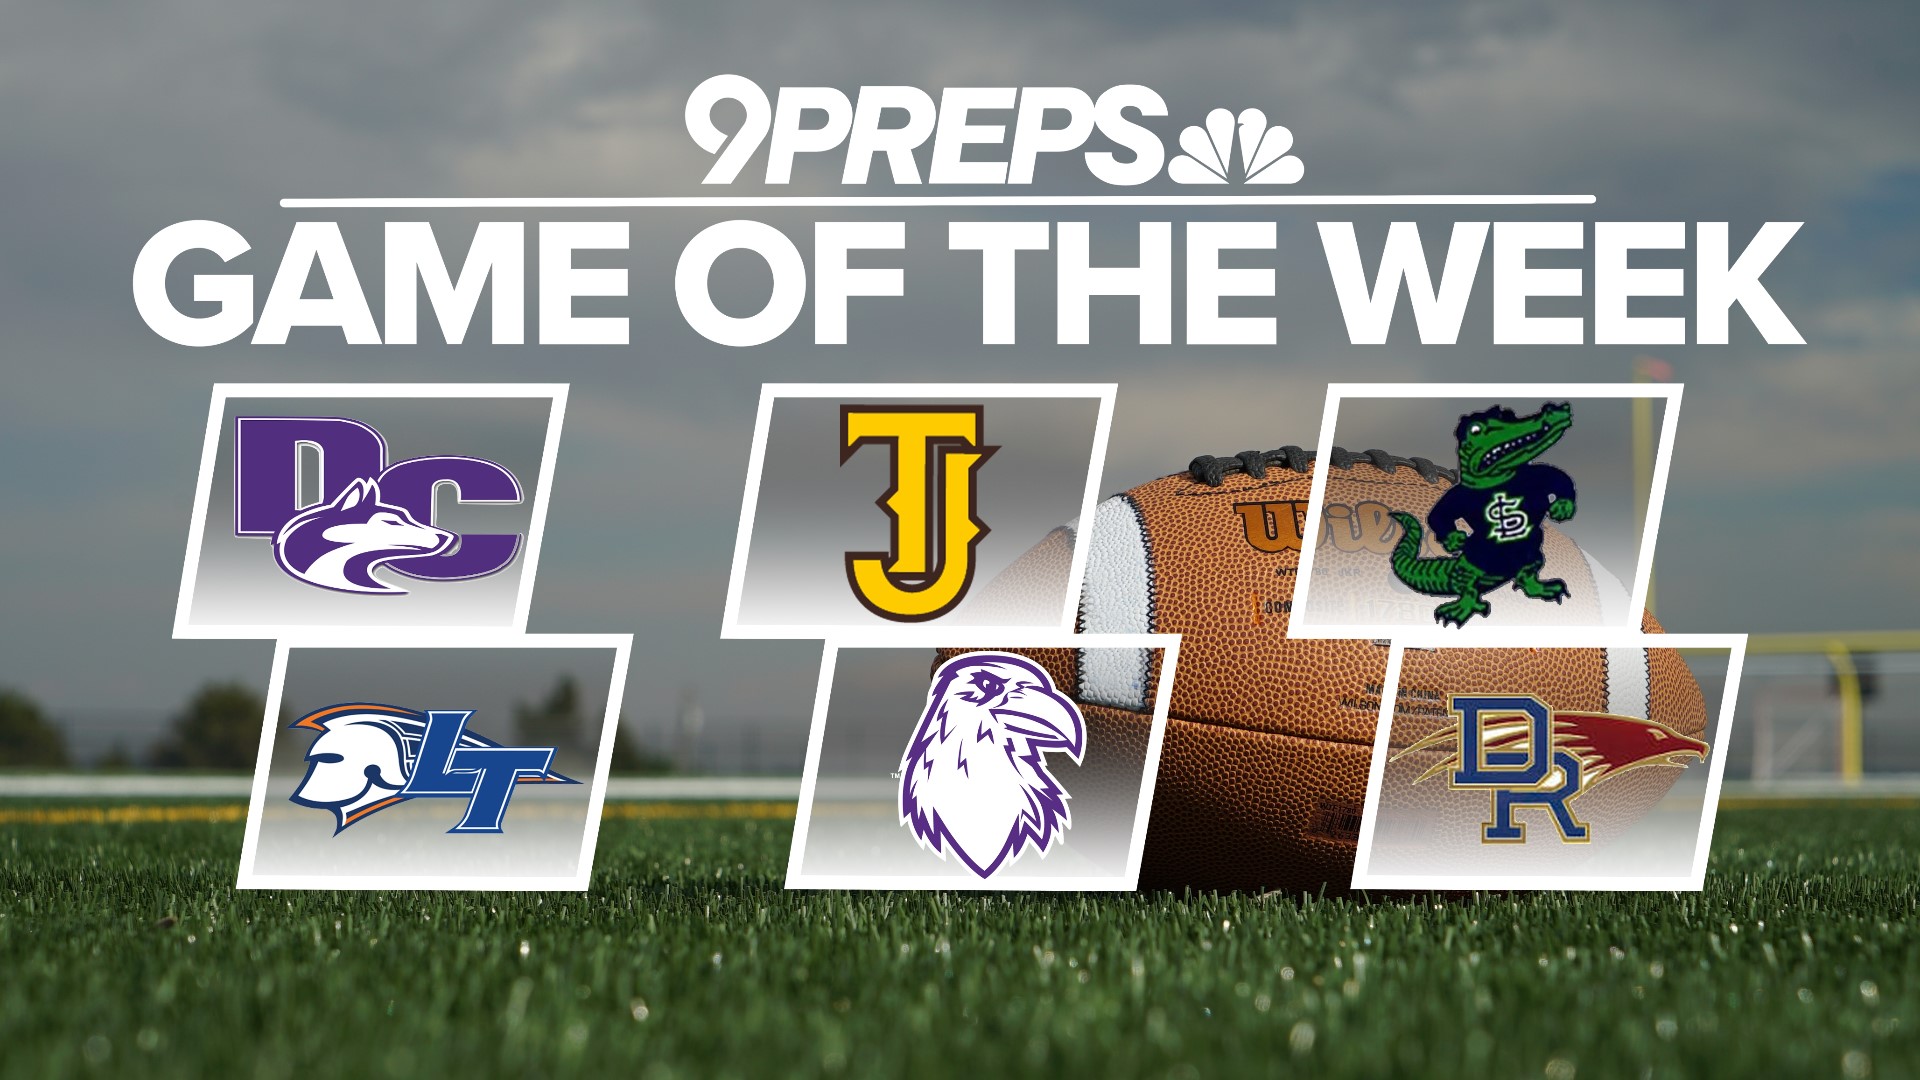 The 9Preps Game of the Week is back! Vote to determine which high school football game we showcase on Friday, Oct. 28.